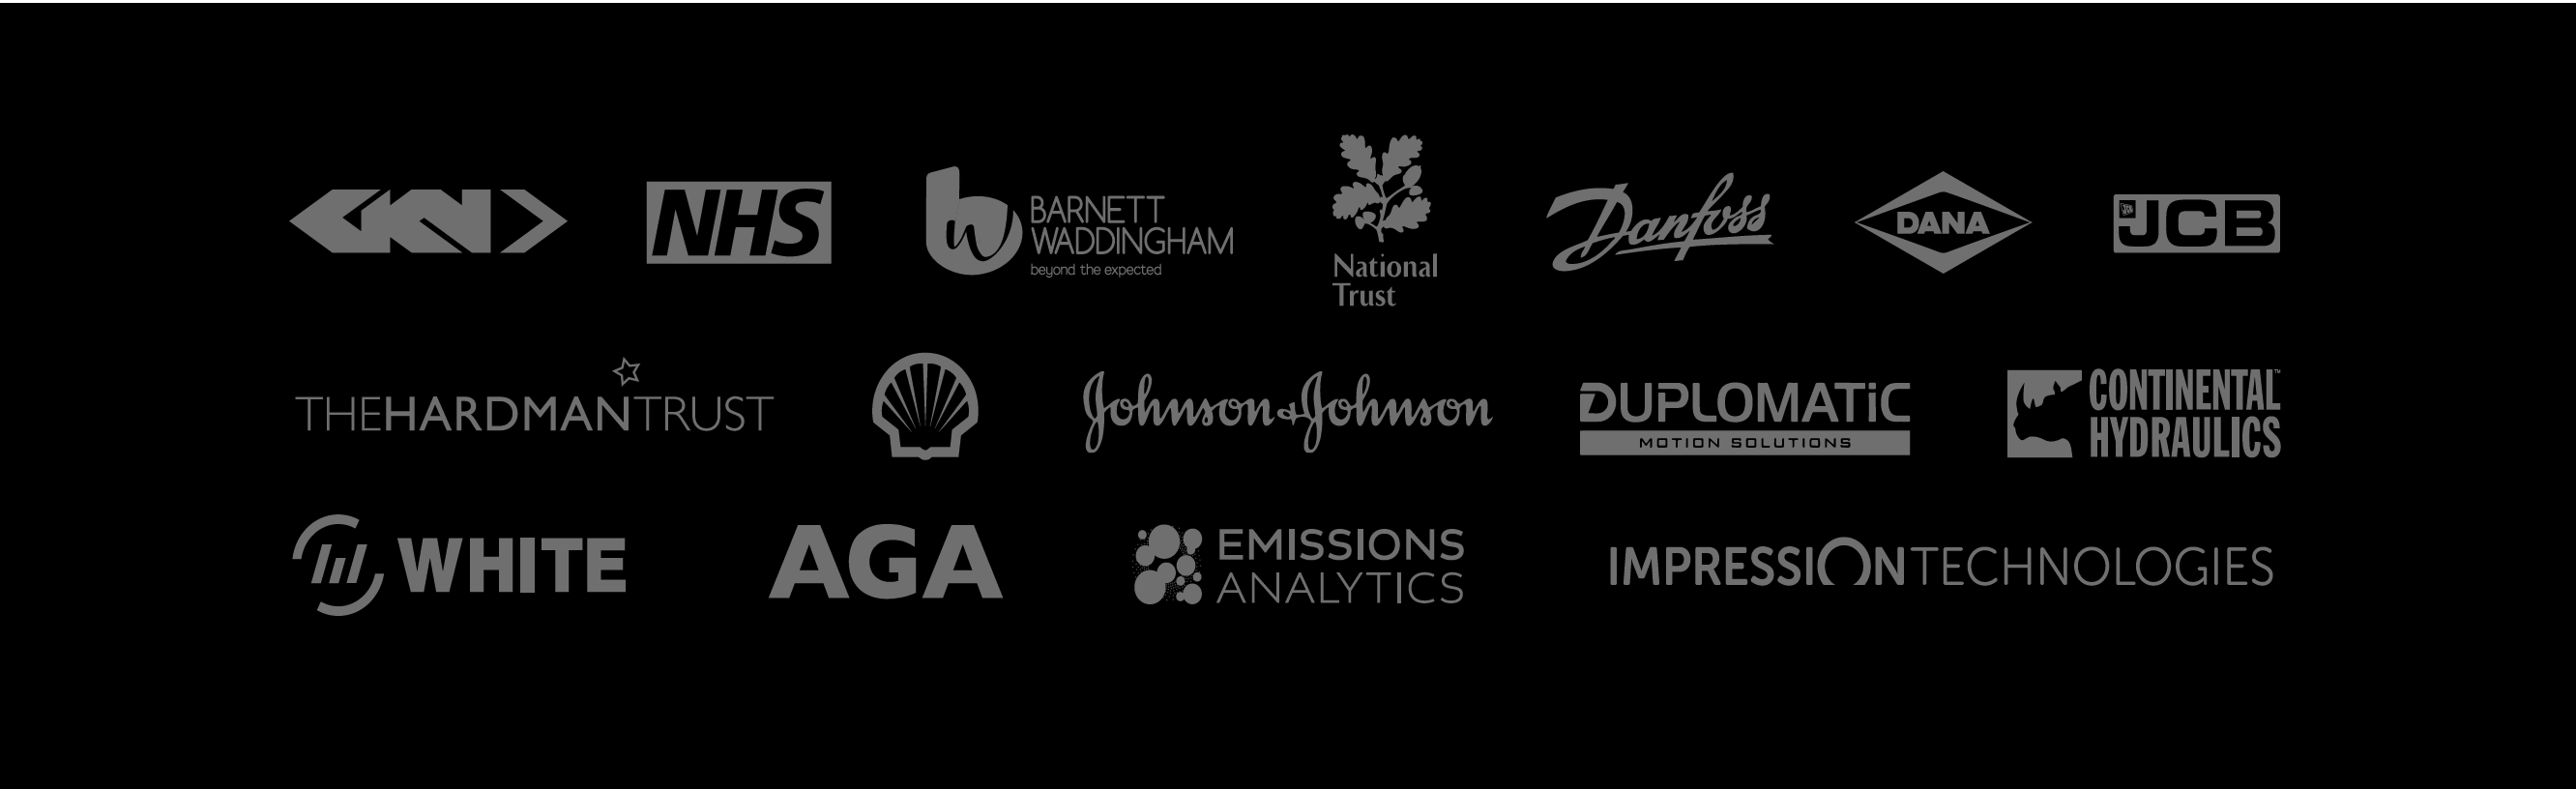 A visual list of client logos consisting of GKN, NHS, Barnett Waddingham, Shell, Johnson & Johnson, Duplomatic, Continental Hydraulics, White, AGA, Emissions Analytics and Impression Technologies